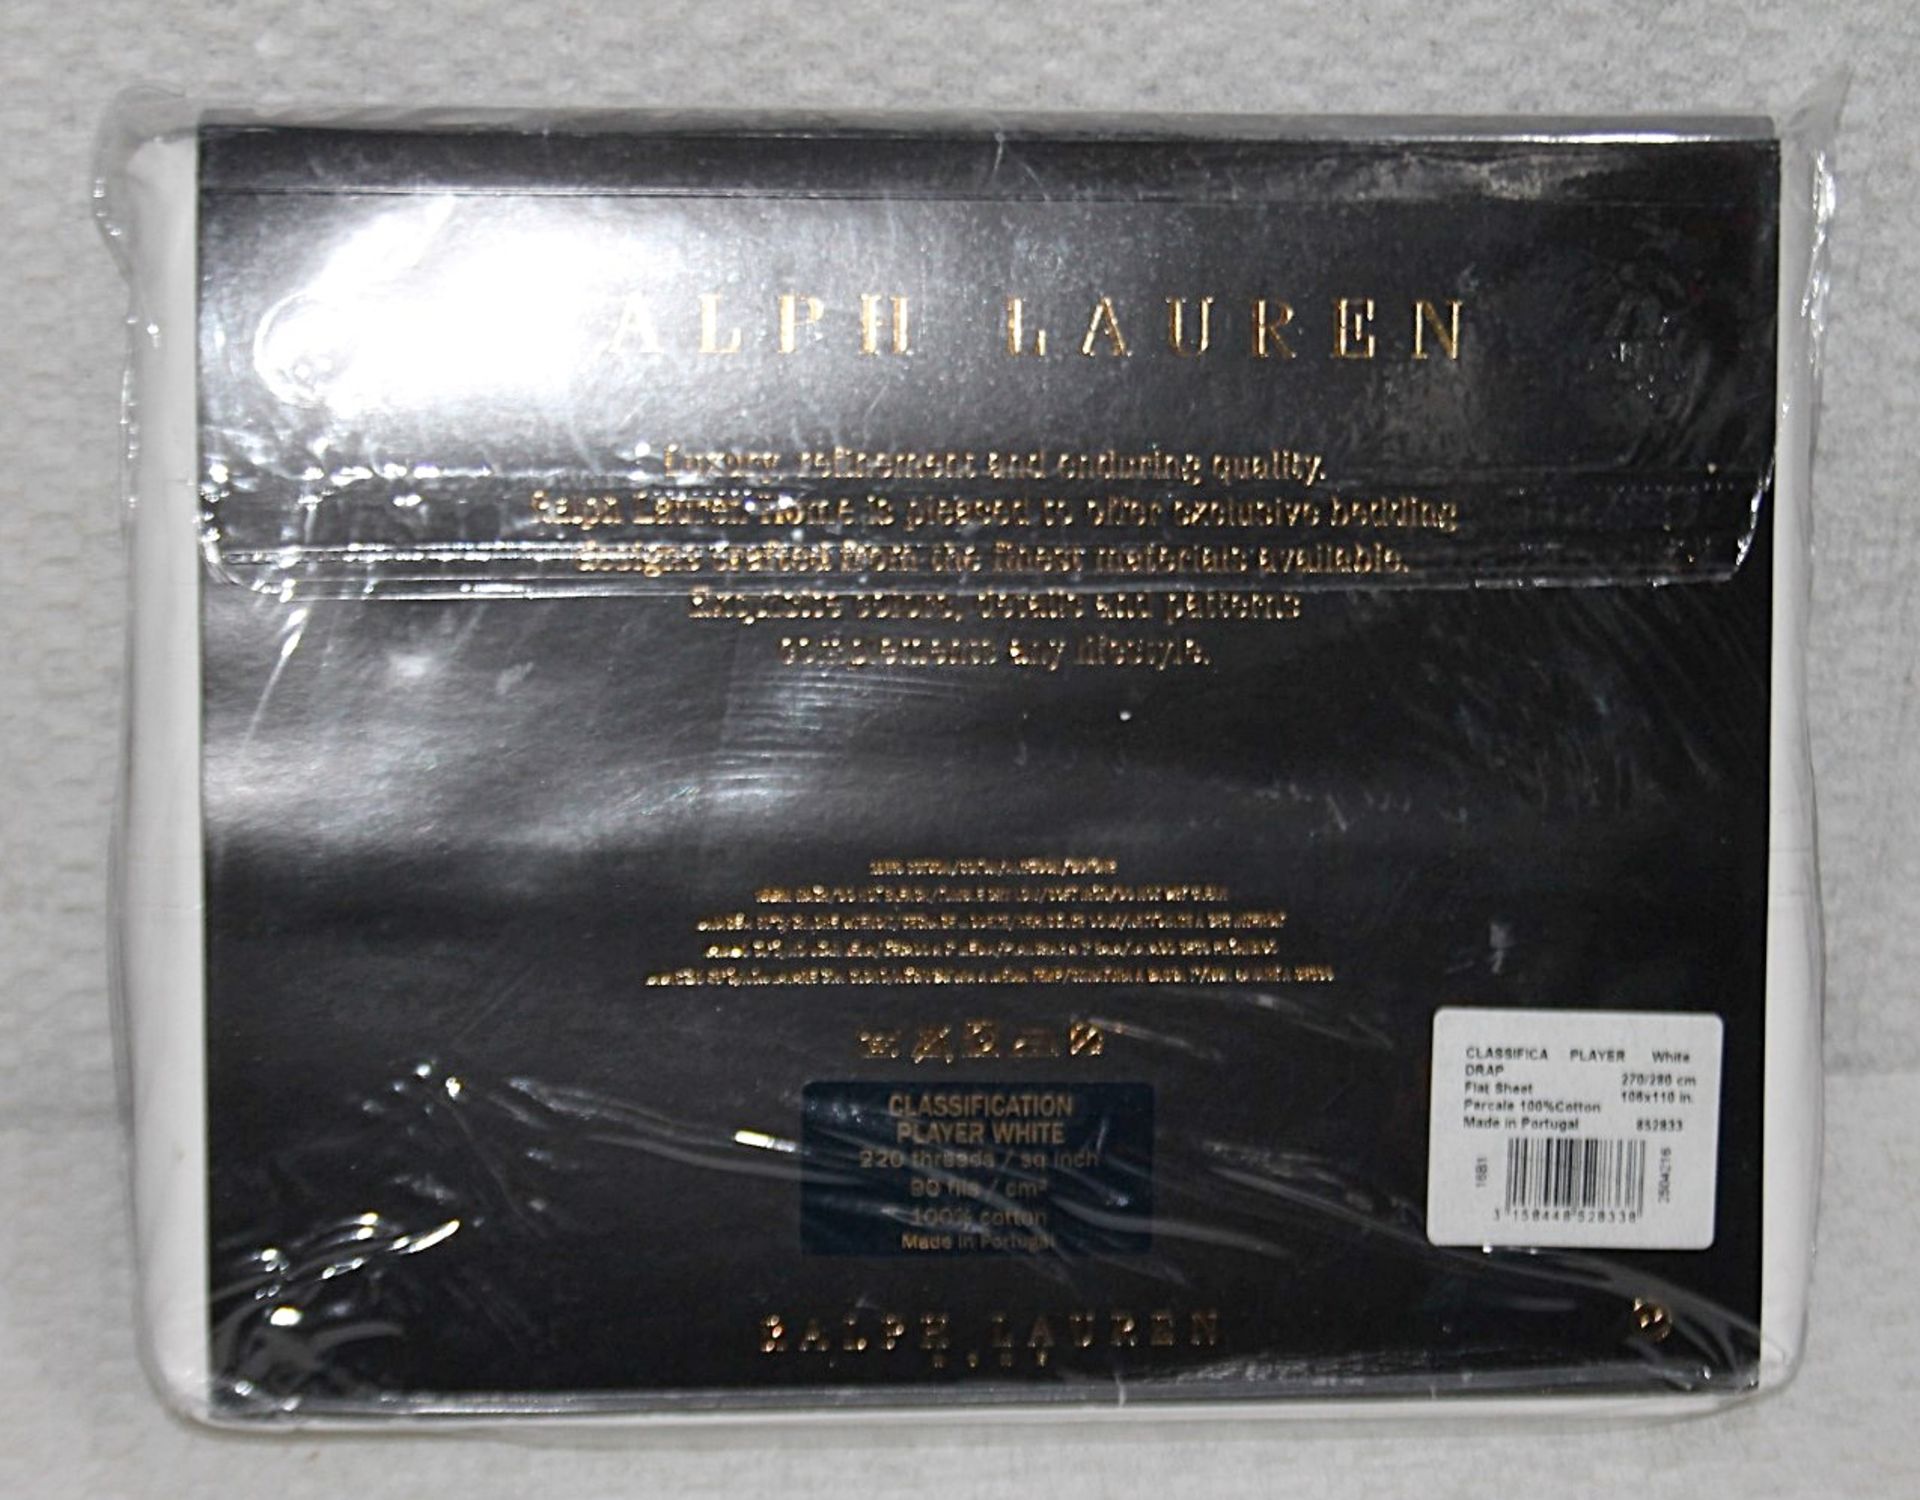 1 x RALPH LAUREN HOME 'Player' Large Flat Sheet In Plain White - Dimensions: 270 x 280 - Image 3 of 6